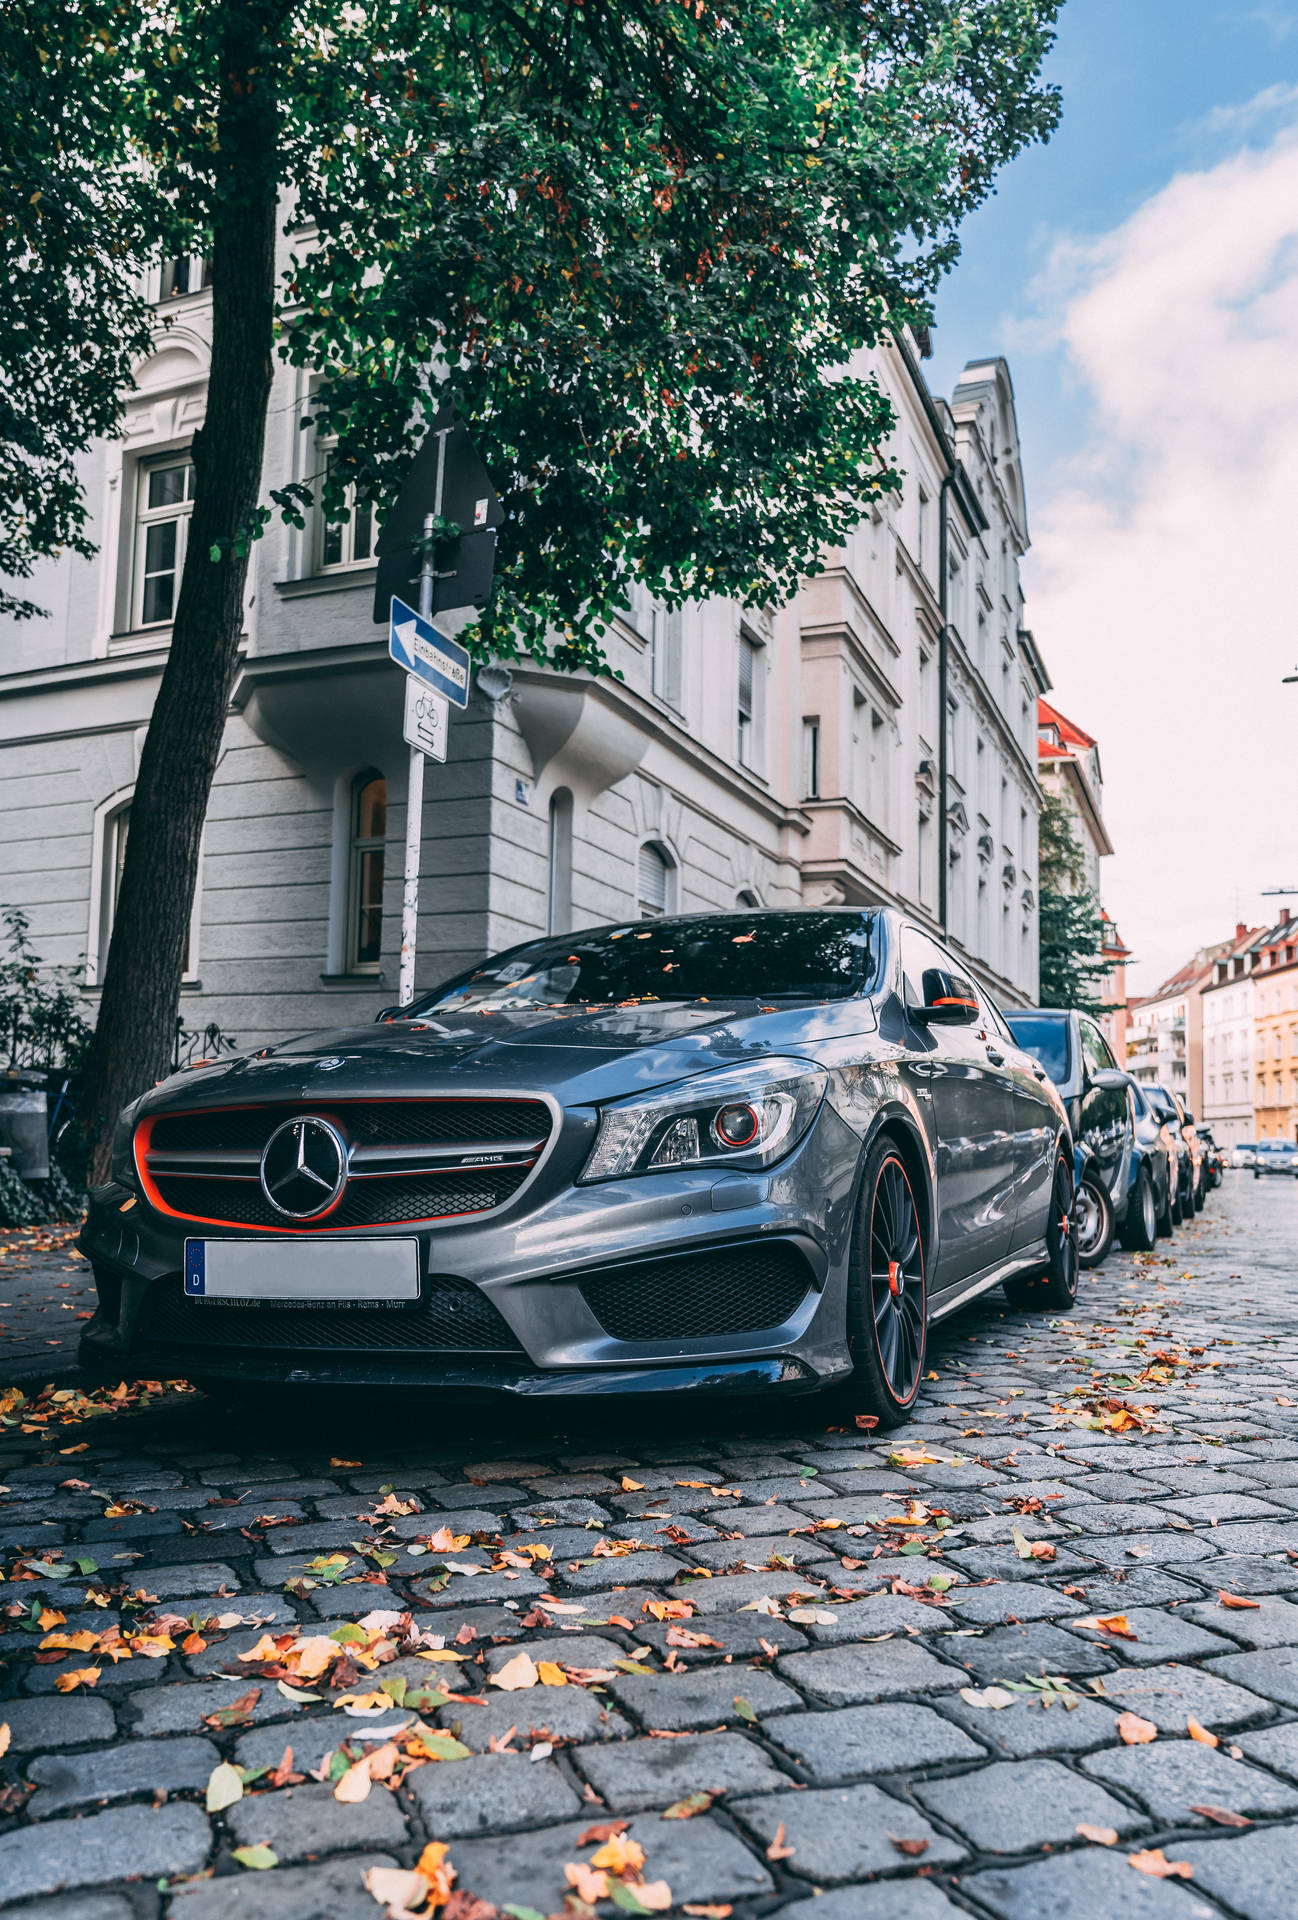 Experience luxury and comfort with the Mercedes Benz AMG Wallpaper